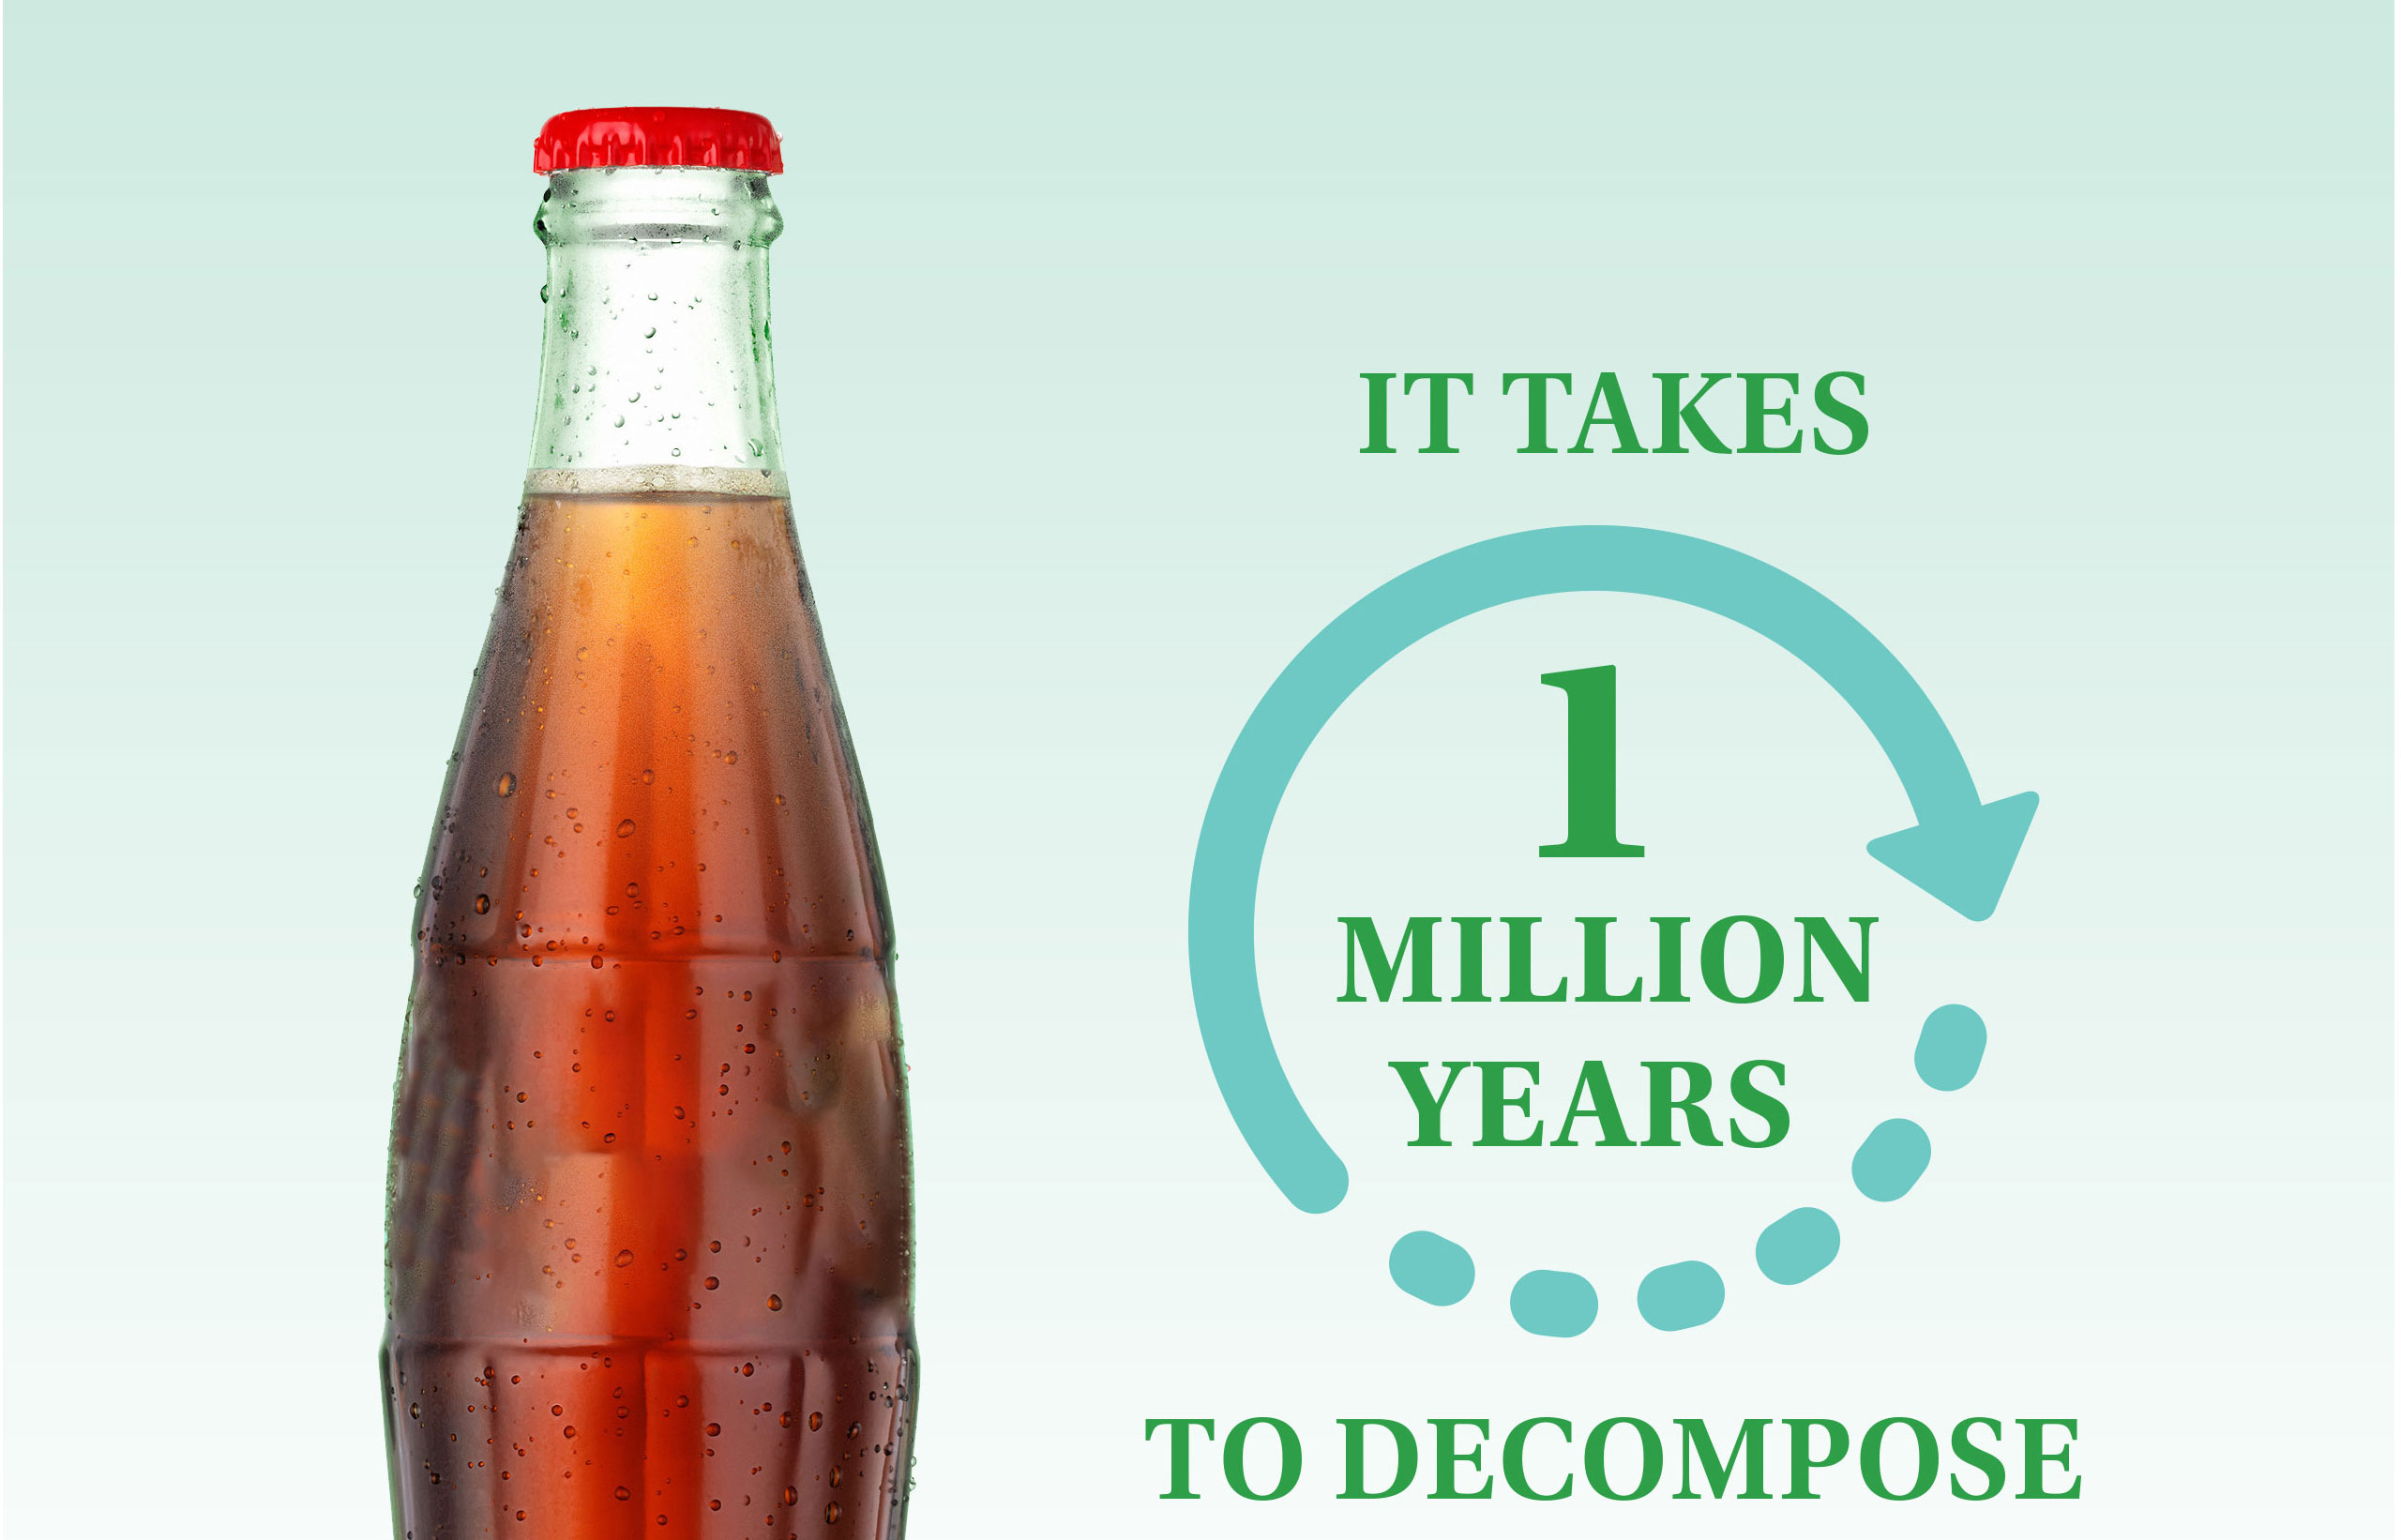 It takes 1 million years to decompose a bottle of soda or 1 minute to recycle it